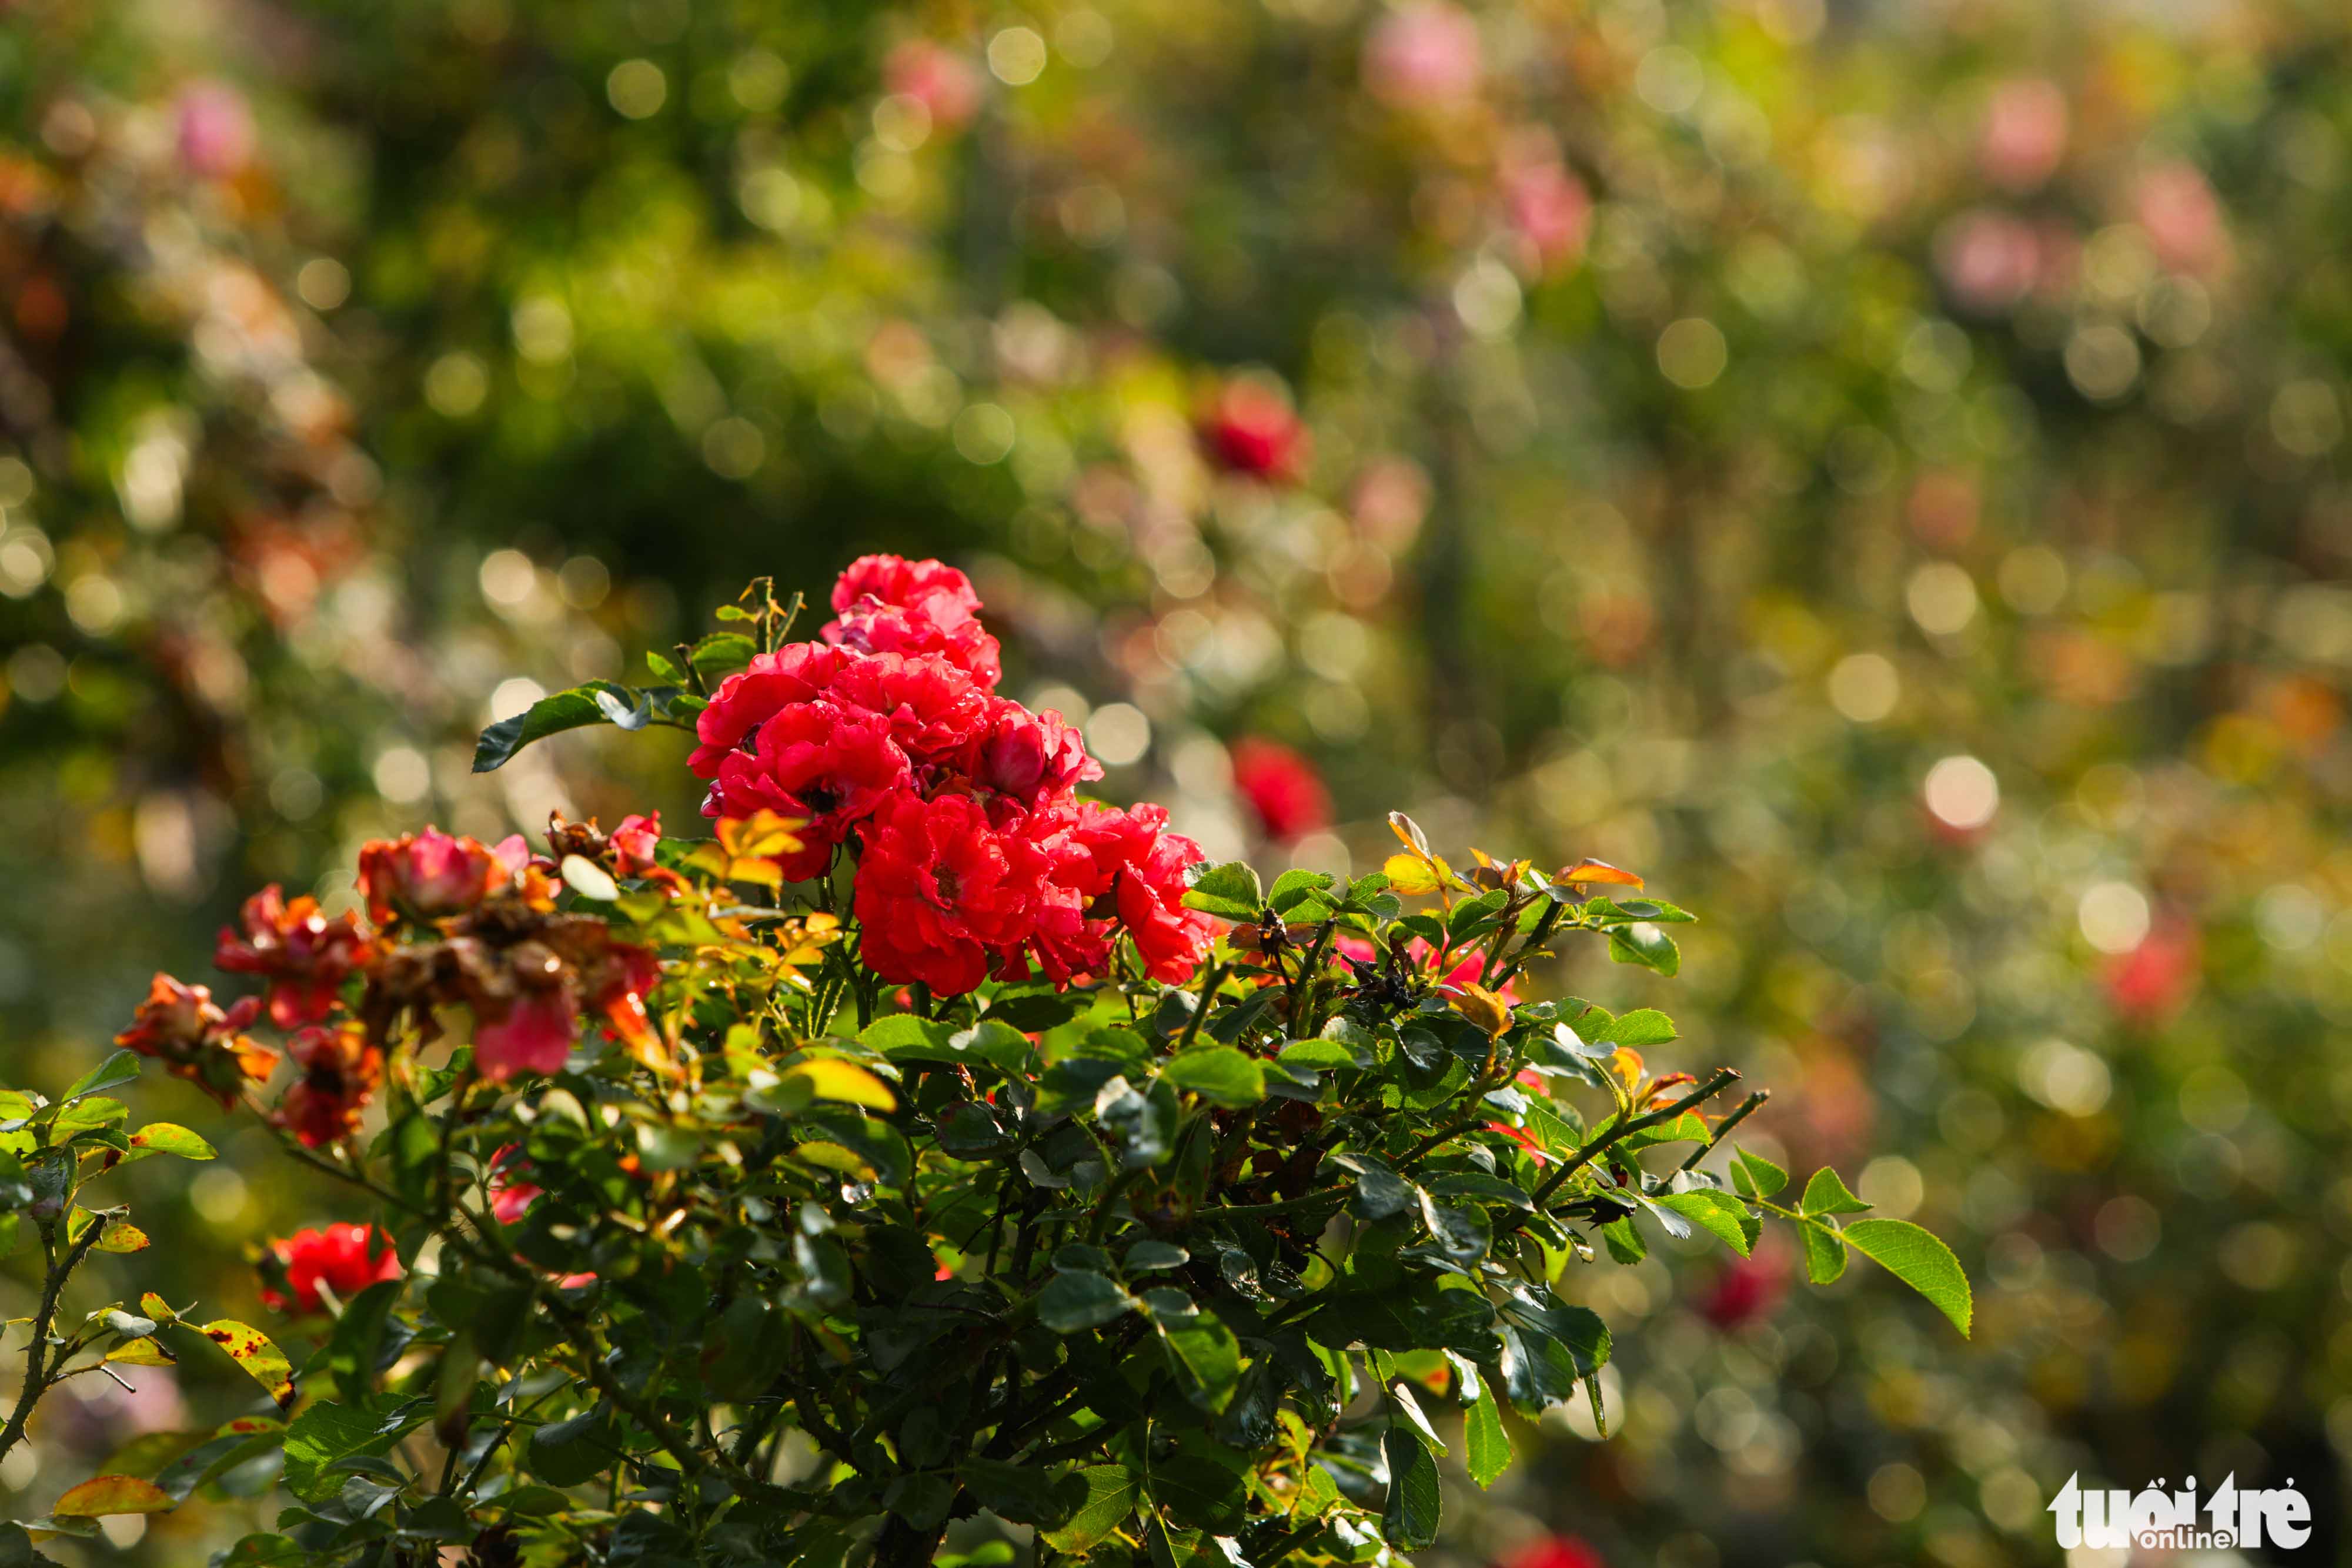 Roses are grown at Me Linh flower village in Me Linh District, Hanoi. Photo: Danh Khang / Tuoi Tre